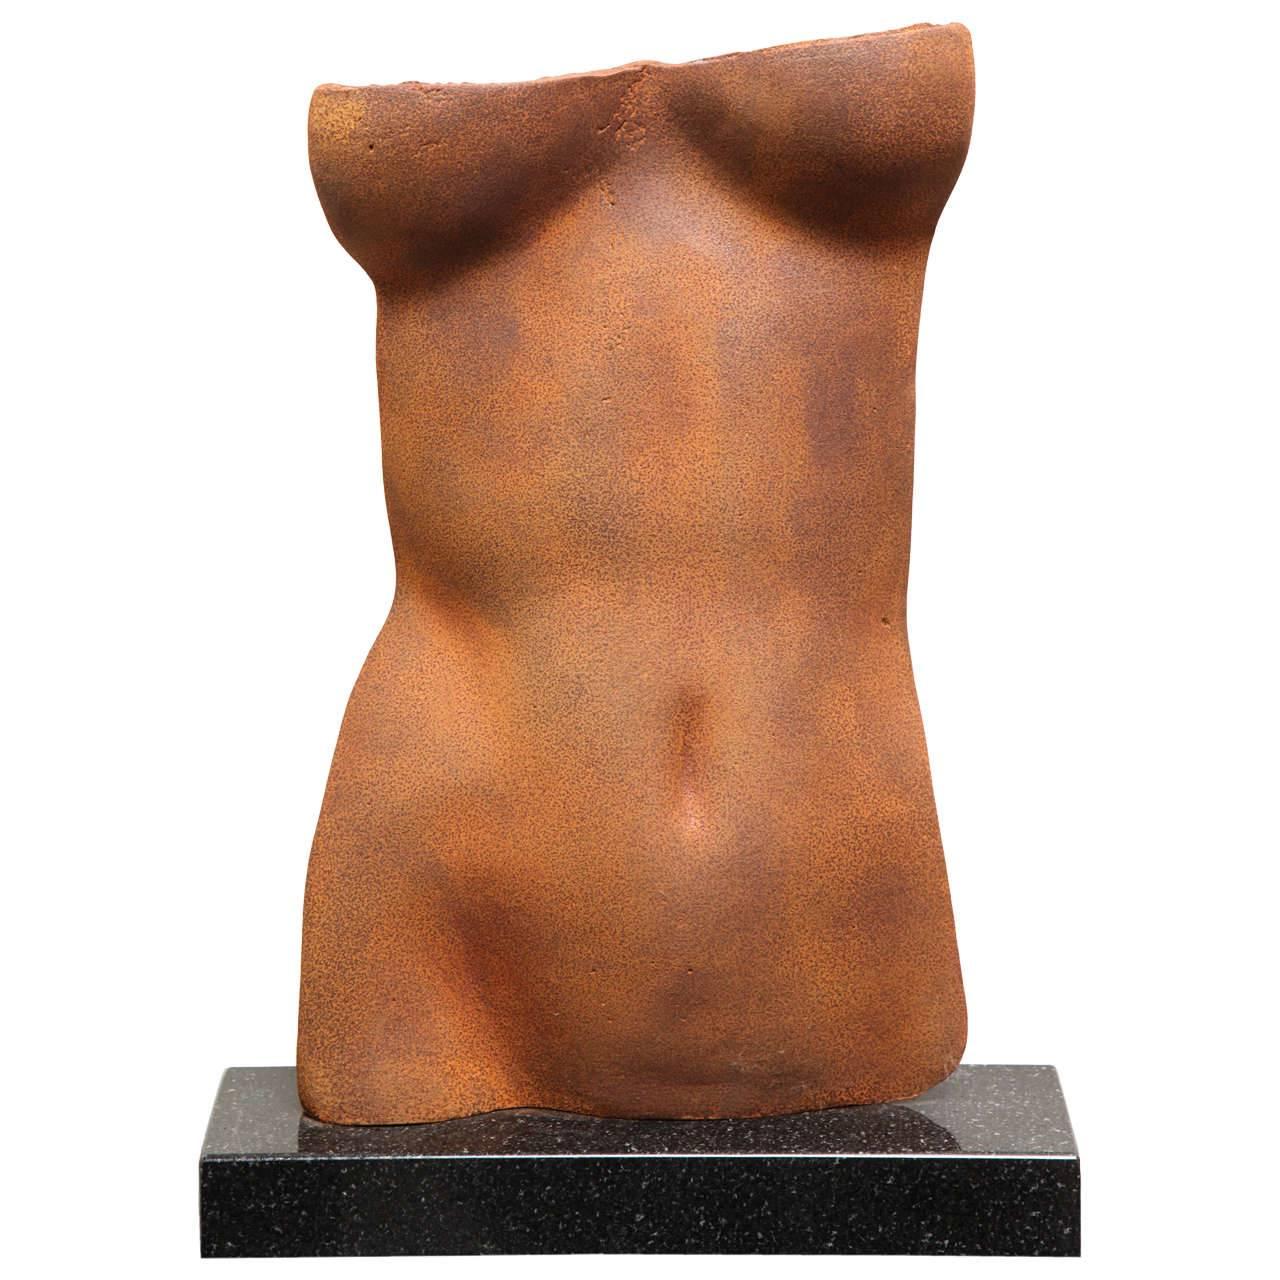 Torso is a classic motif today and  in the Hellenistic Time.
This Cast Iron Torso on Granite Base is edition 9 of 10.
The sculpture is the perfect &quot;Gods of Small Things&quot;. Rare and unique.